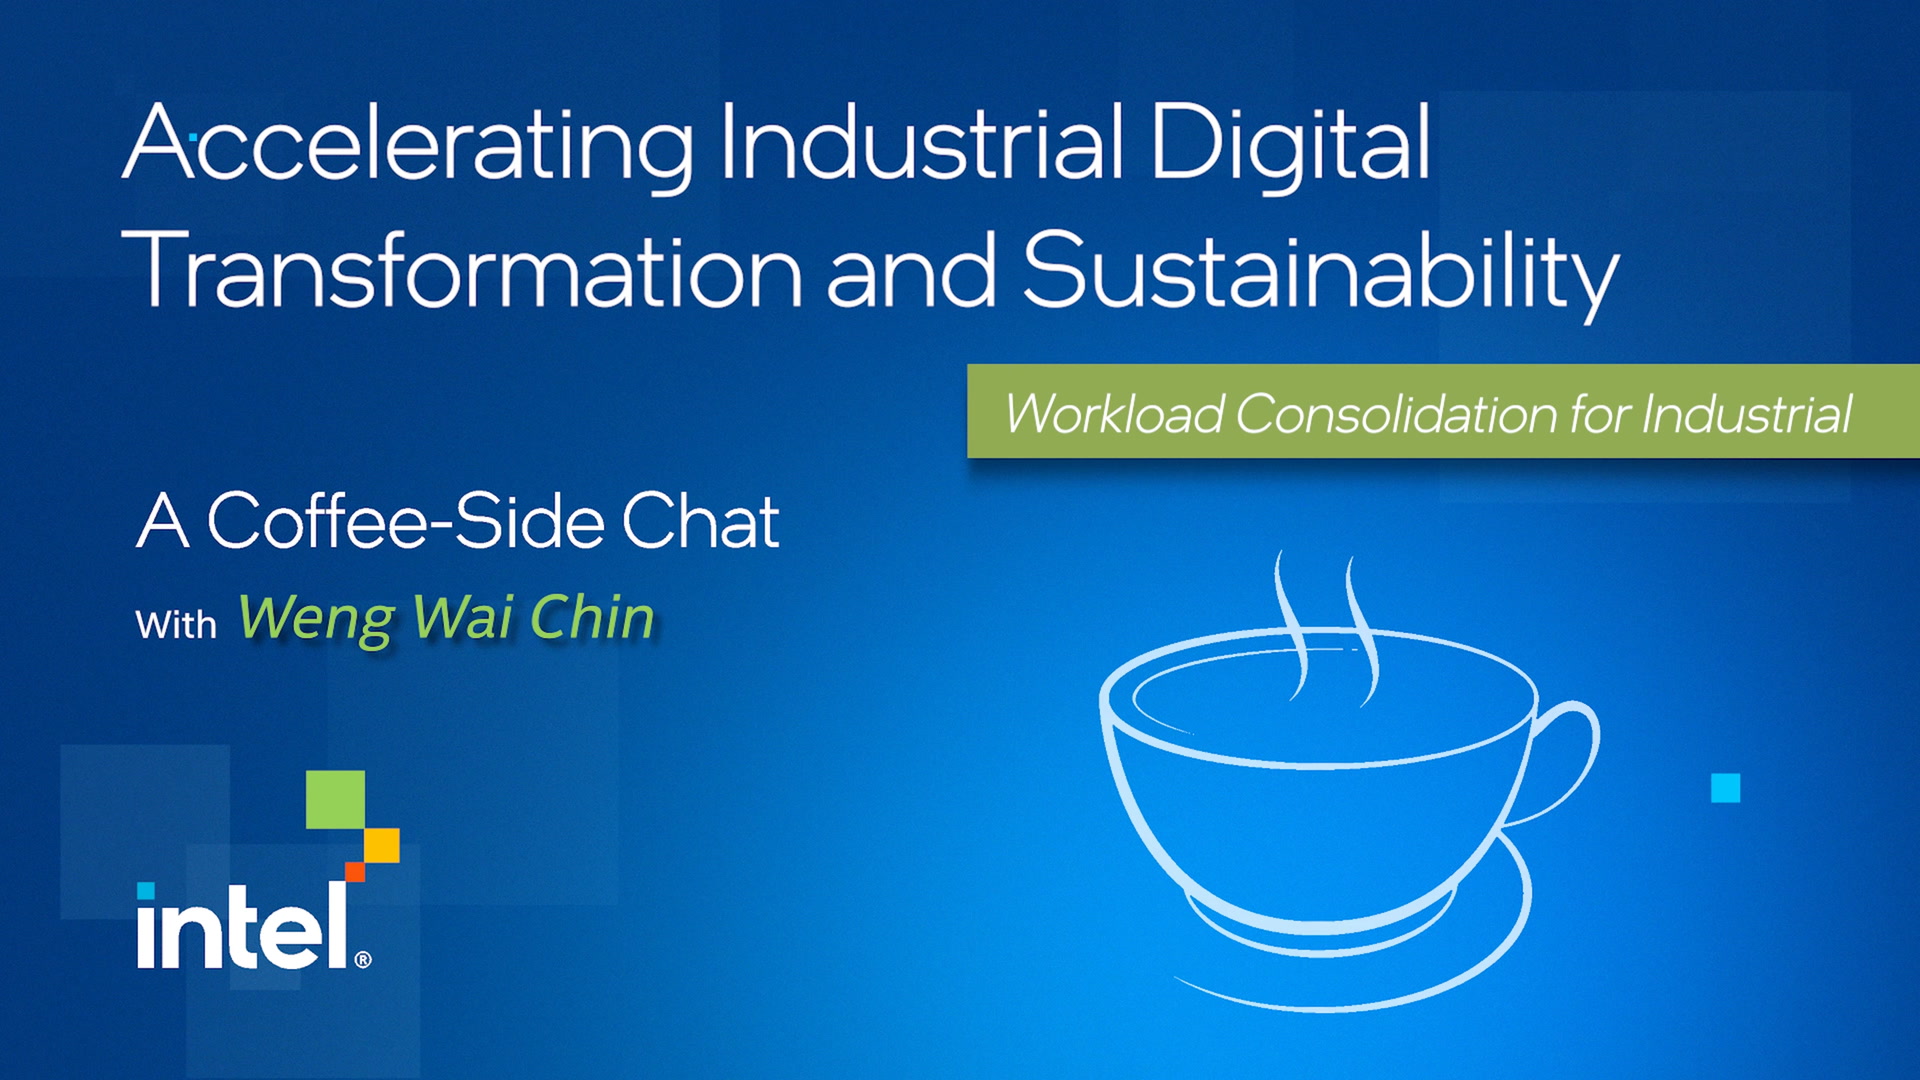 Accelerating Industrial Digital Transformation and Sustainability